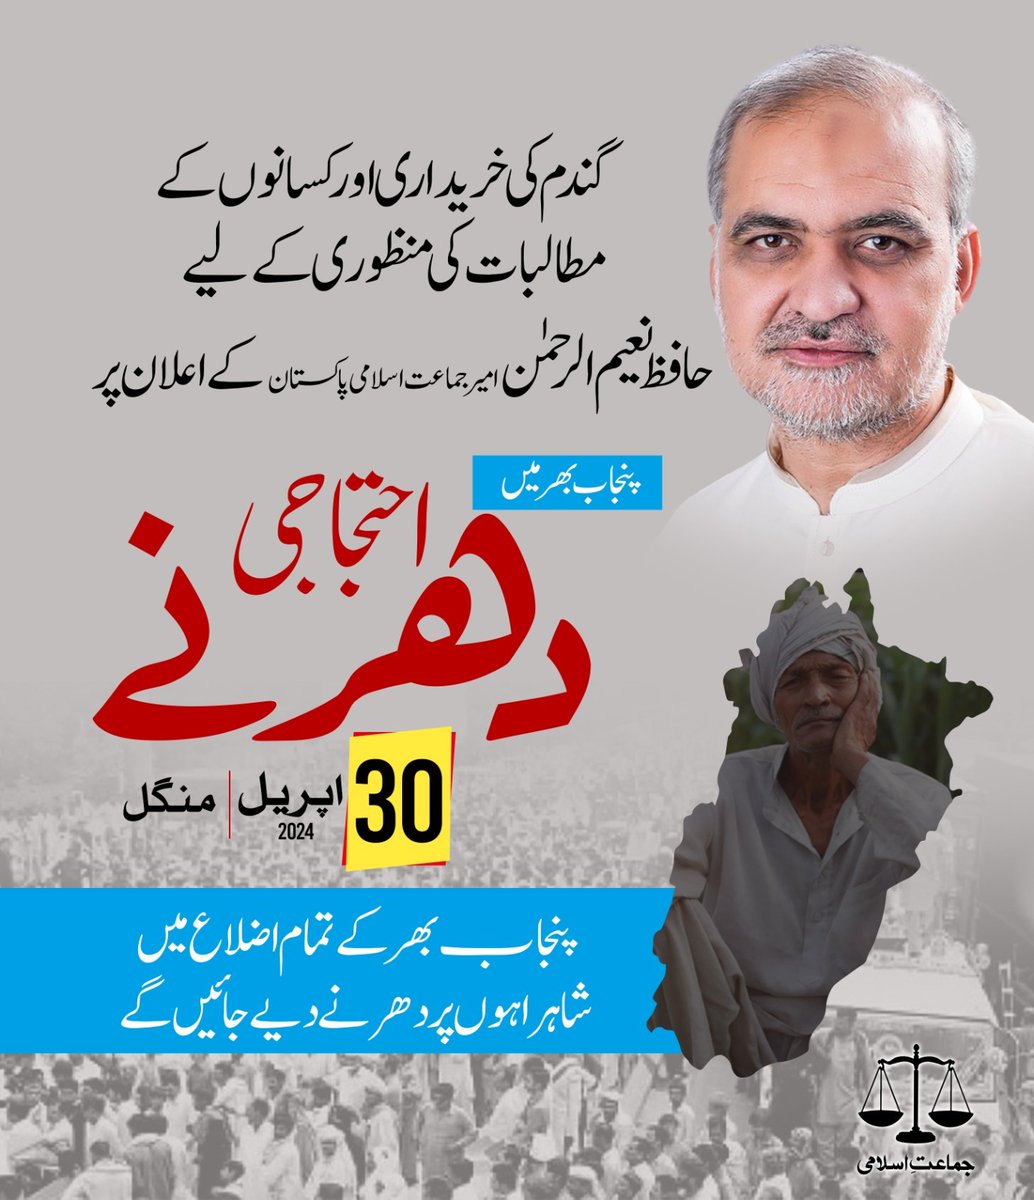 Punjab government is doing economic massacre of farmers.  Jamaat-e-Islami will not tolerate the anti-farmer policy of the Punjab government.
#حق_دو_کسان_کو